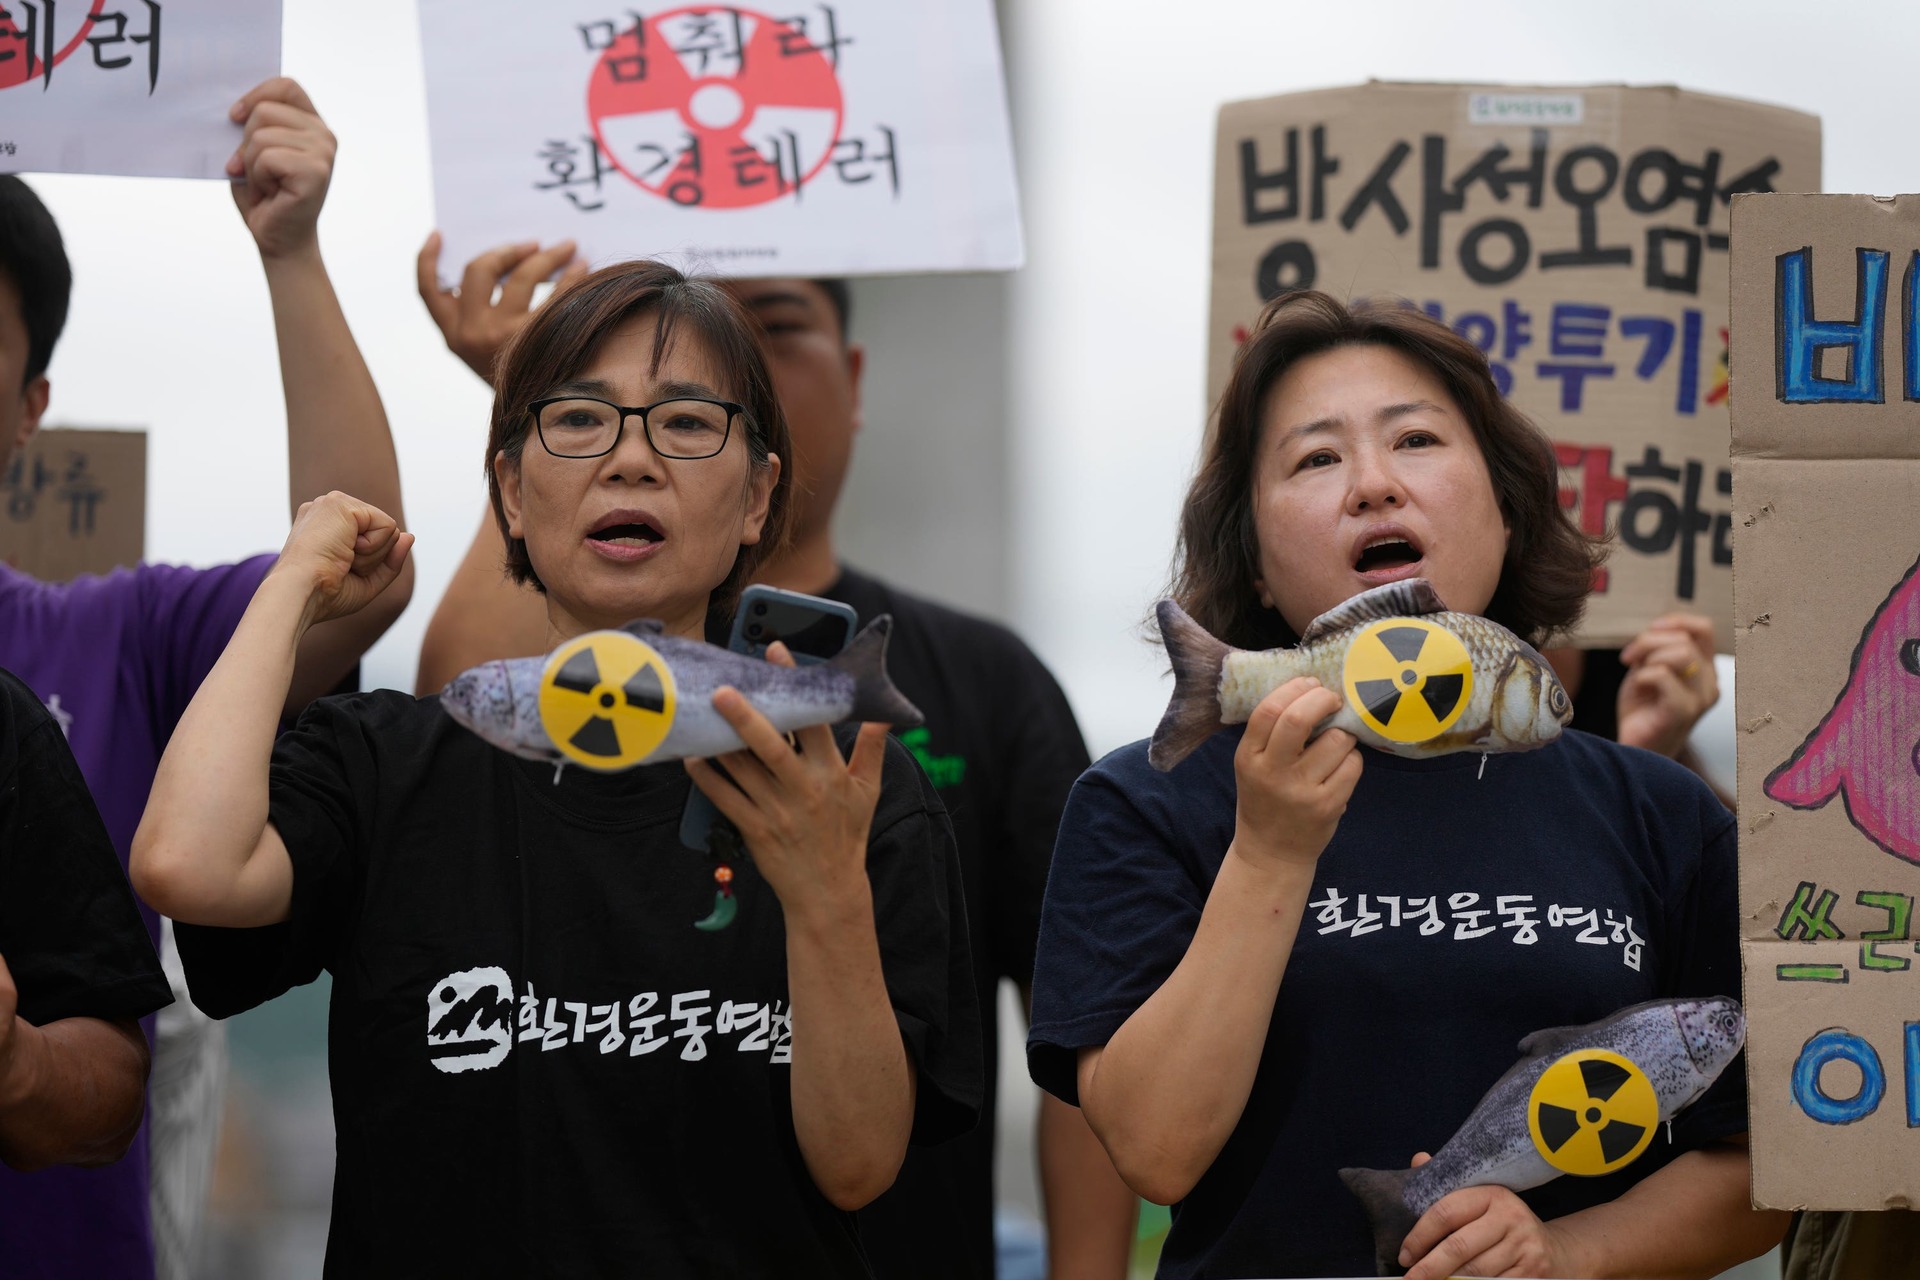 Members of an environmental group shout slogans during a rally to demand the stop of the Japanese government’s decision in Seoul, South Korea.